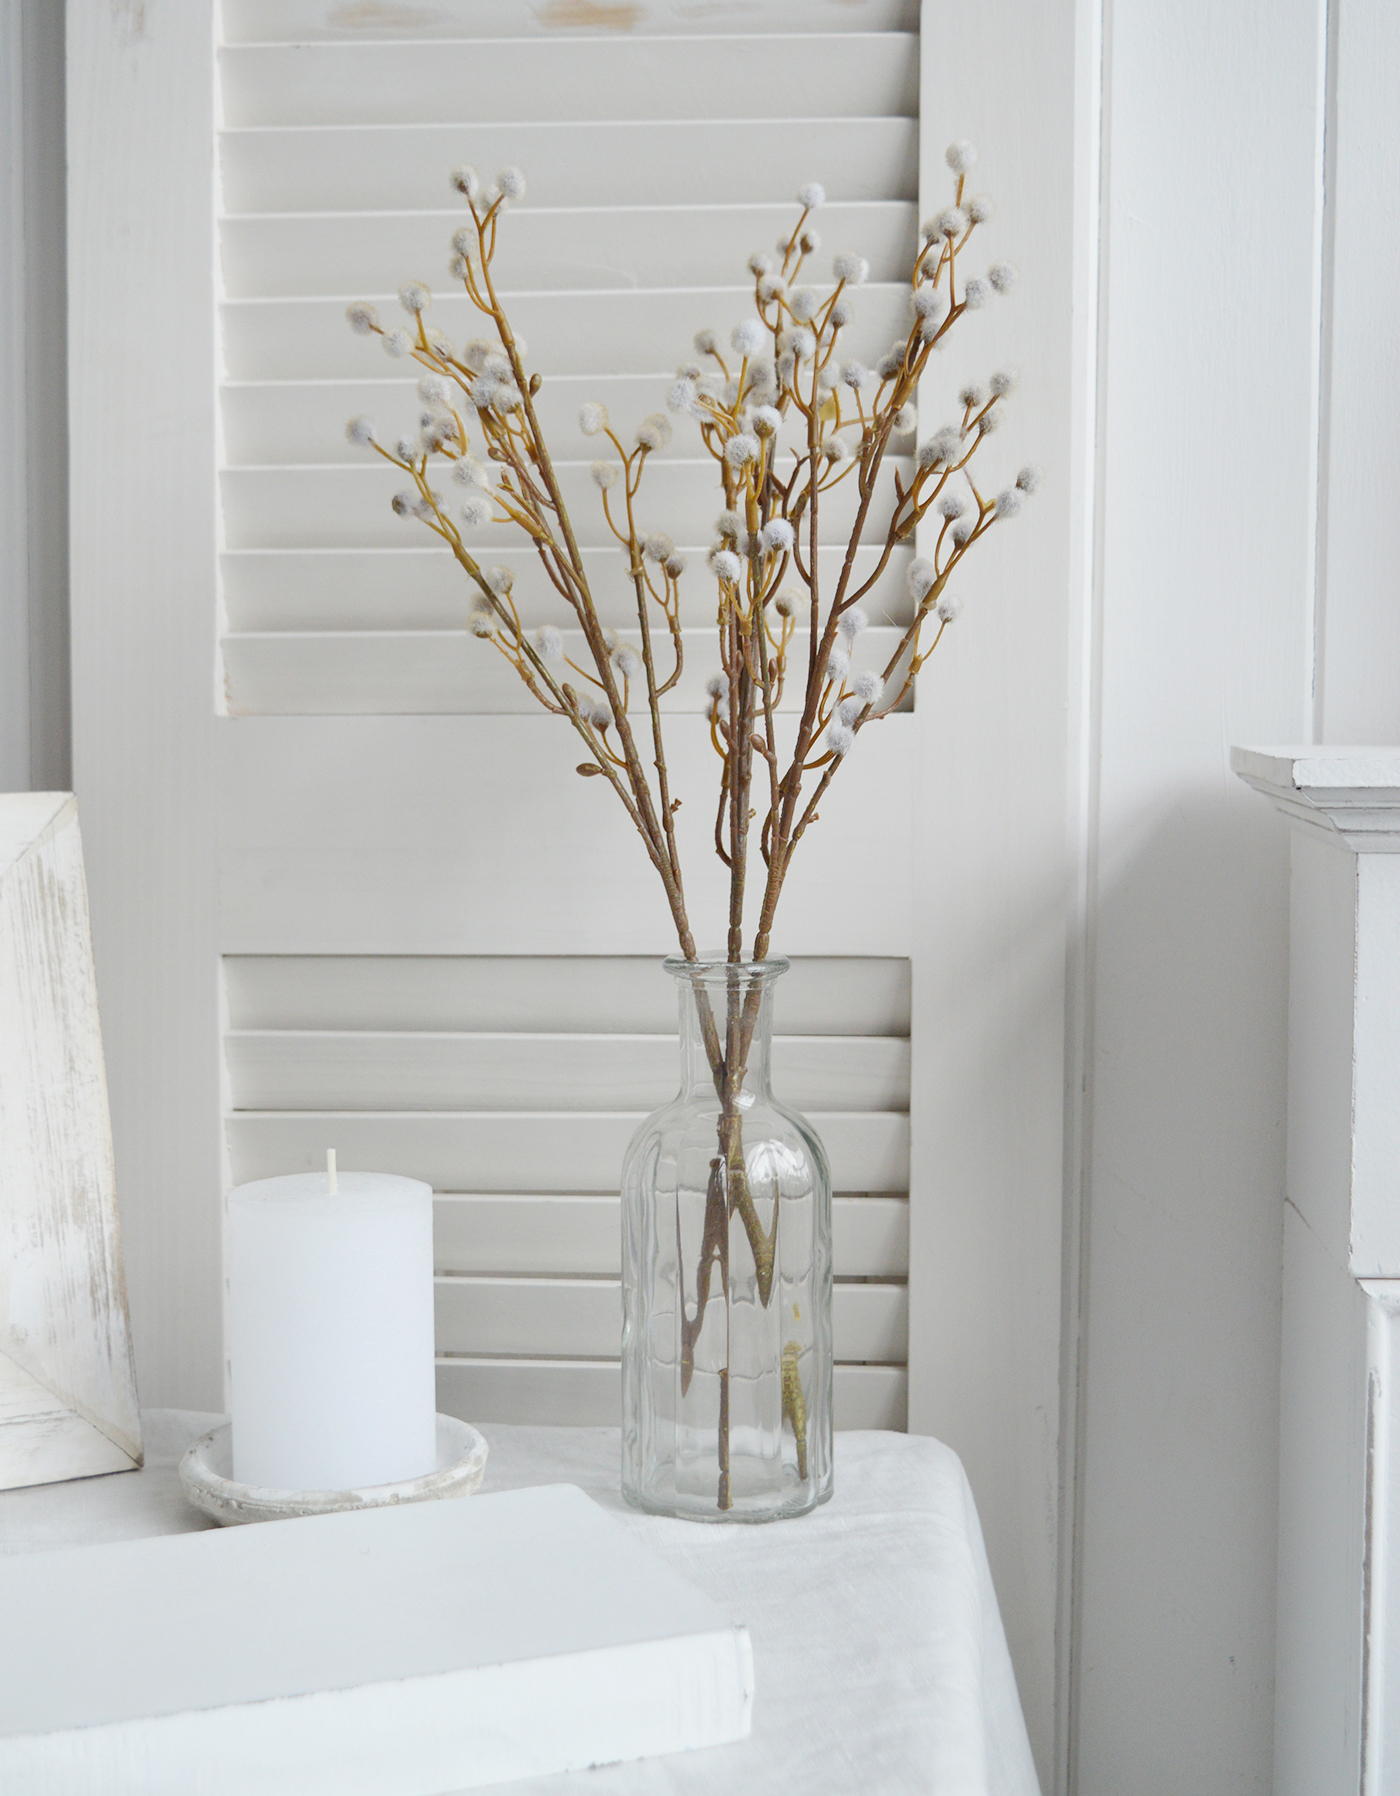 Faux Pussy Willow sprig - New England coastal, modern farmhouse and country furnutyre and interiors